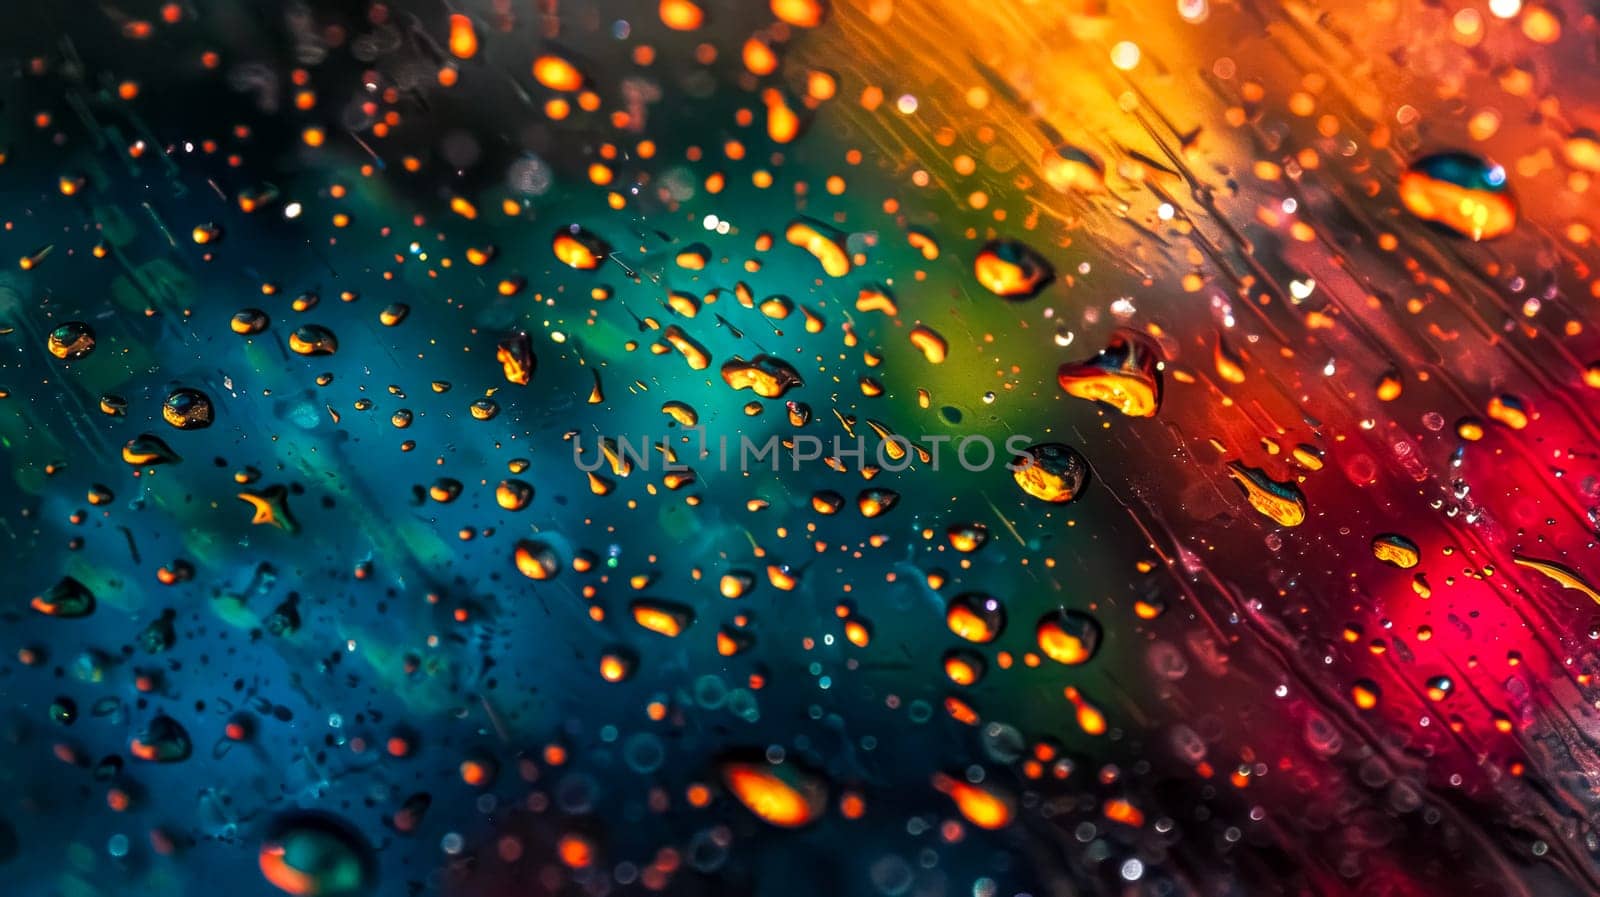 Close-up vibrant raindrops on glass surface with colorful water droplets creating a mesmerizing and abstract macro texture. Reflecting a blurred background with a rainbow of colors and a shiny